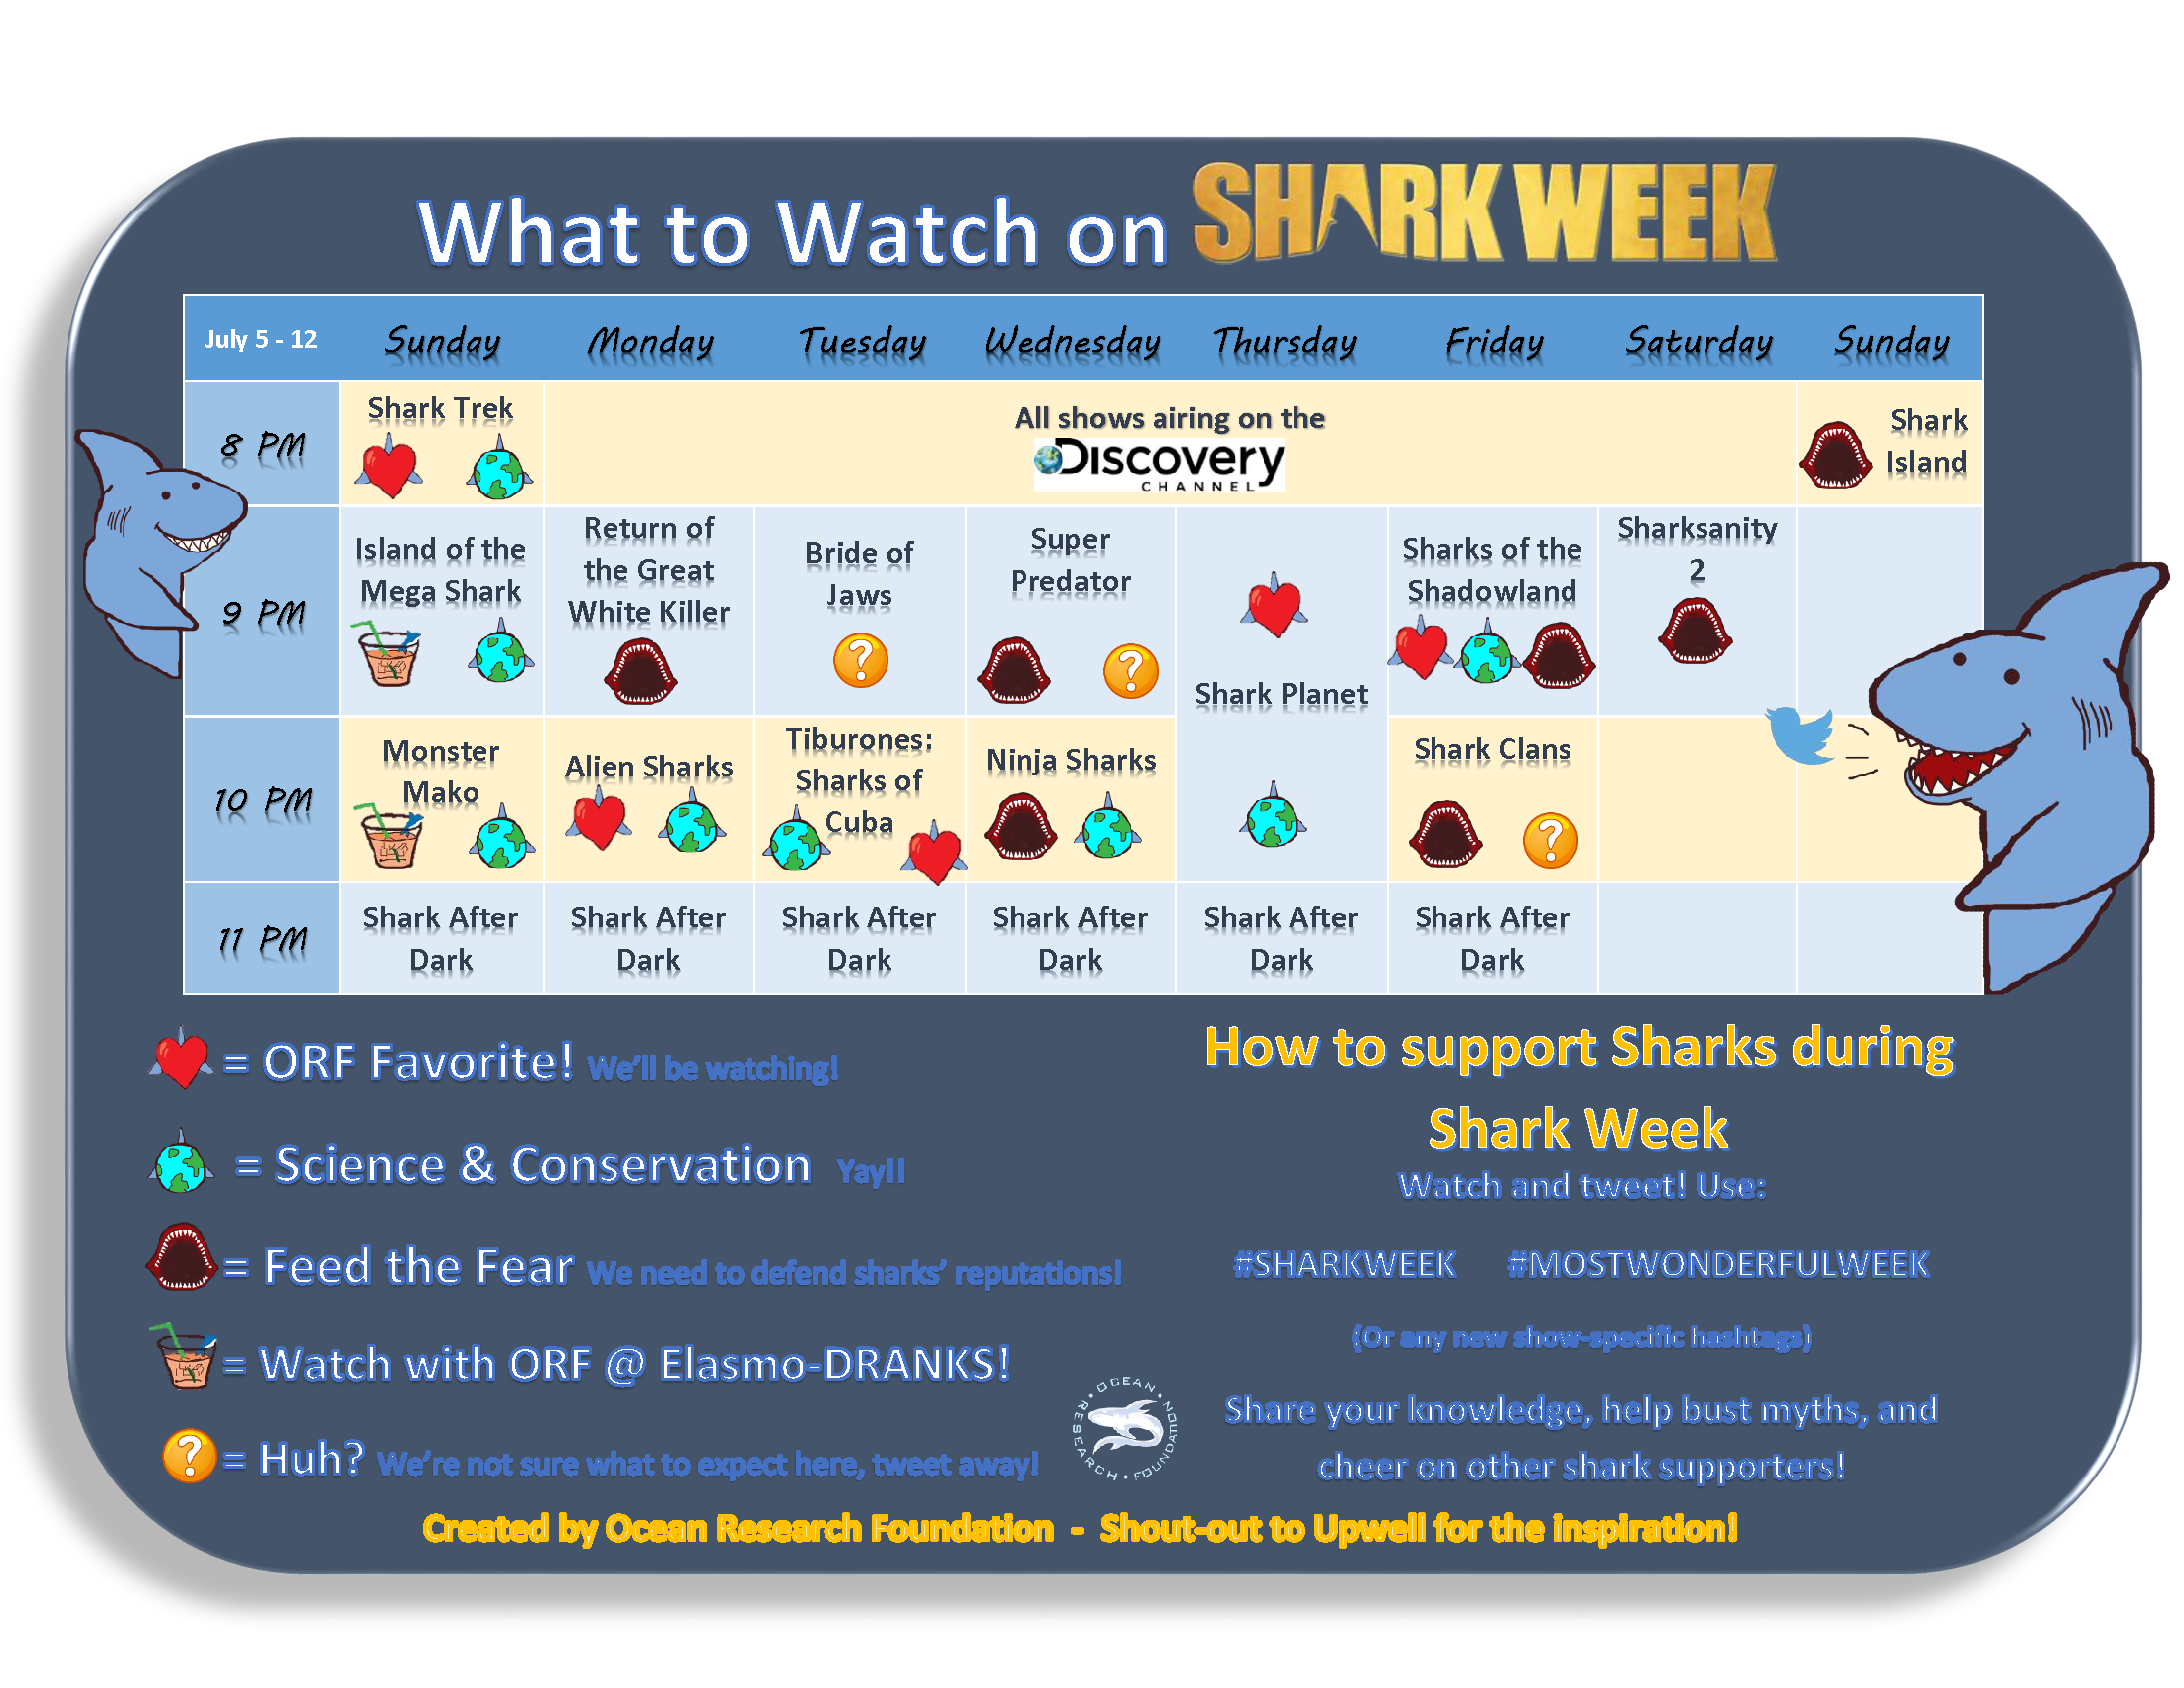 #WhatToWatch for #SharkWeek2015 Image created by Shelley Davis of the Ocean Research Foundation. 